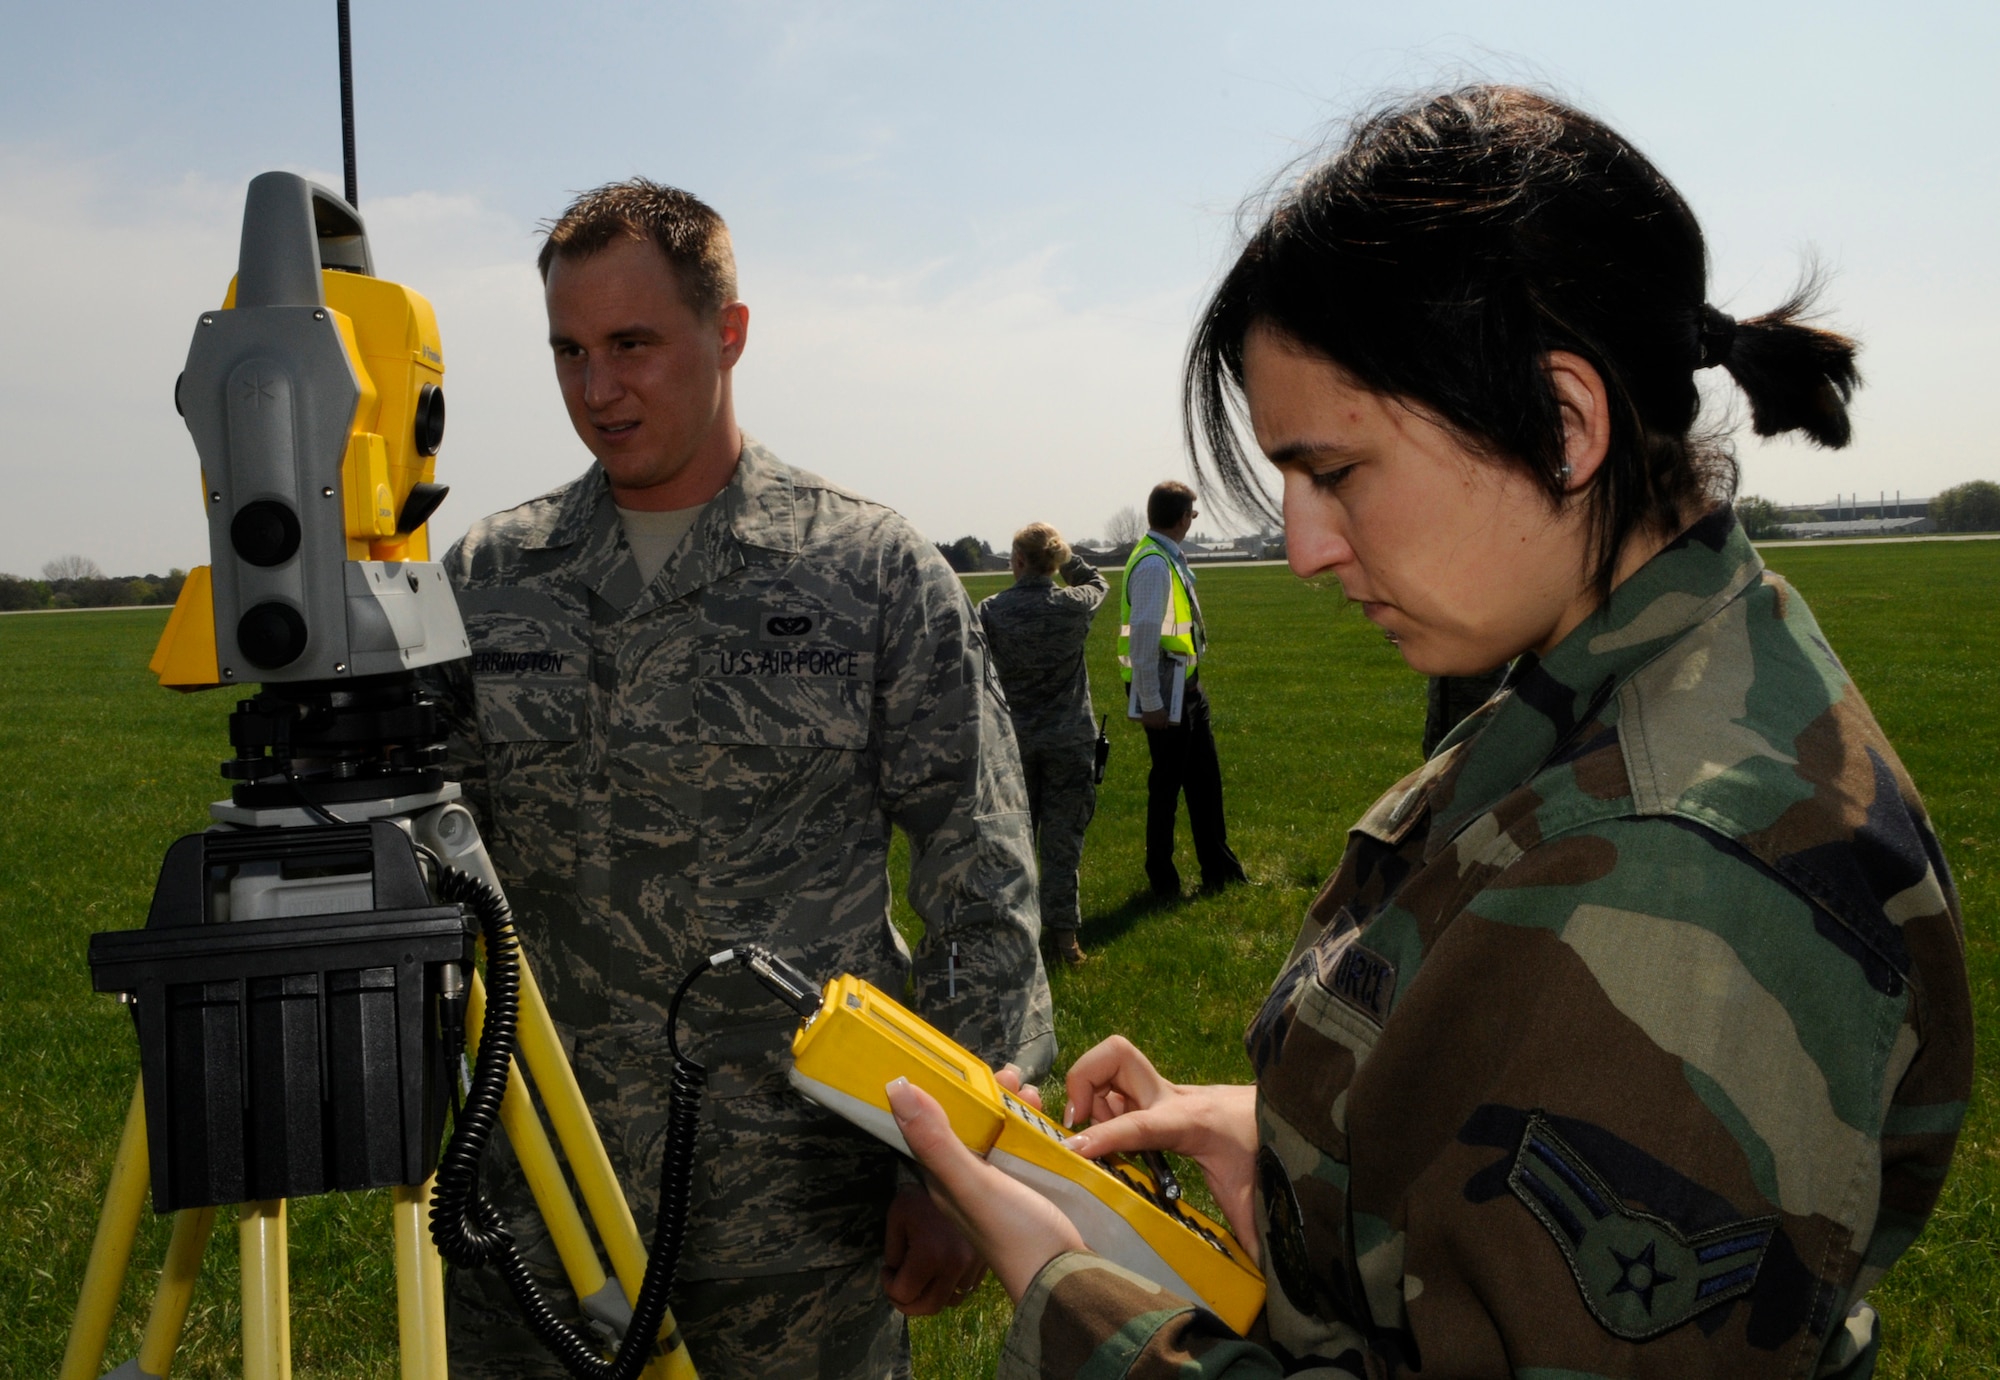 Airman 1st Class Angela Kisiday and Staff Sgt. Daniel Herrington, Geo-Base technicians from the 100th Civil Engineer Squadron, calibrate their equipment before they conduct a grounds survey near the end of the runway at RAF Mildenhall, April 21, 2009.  